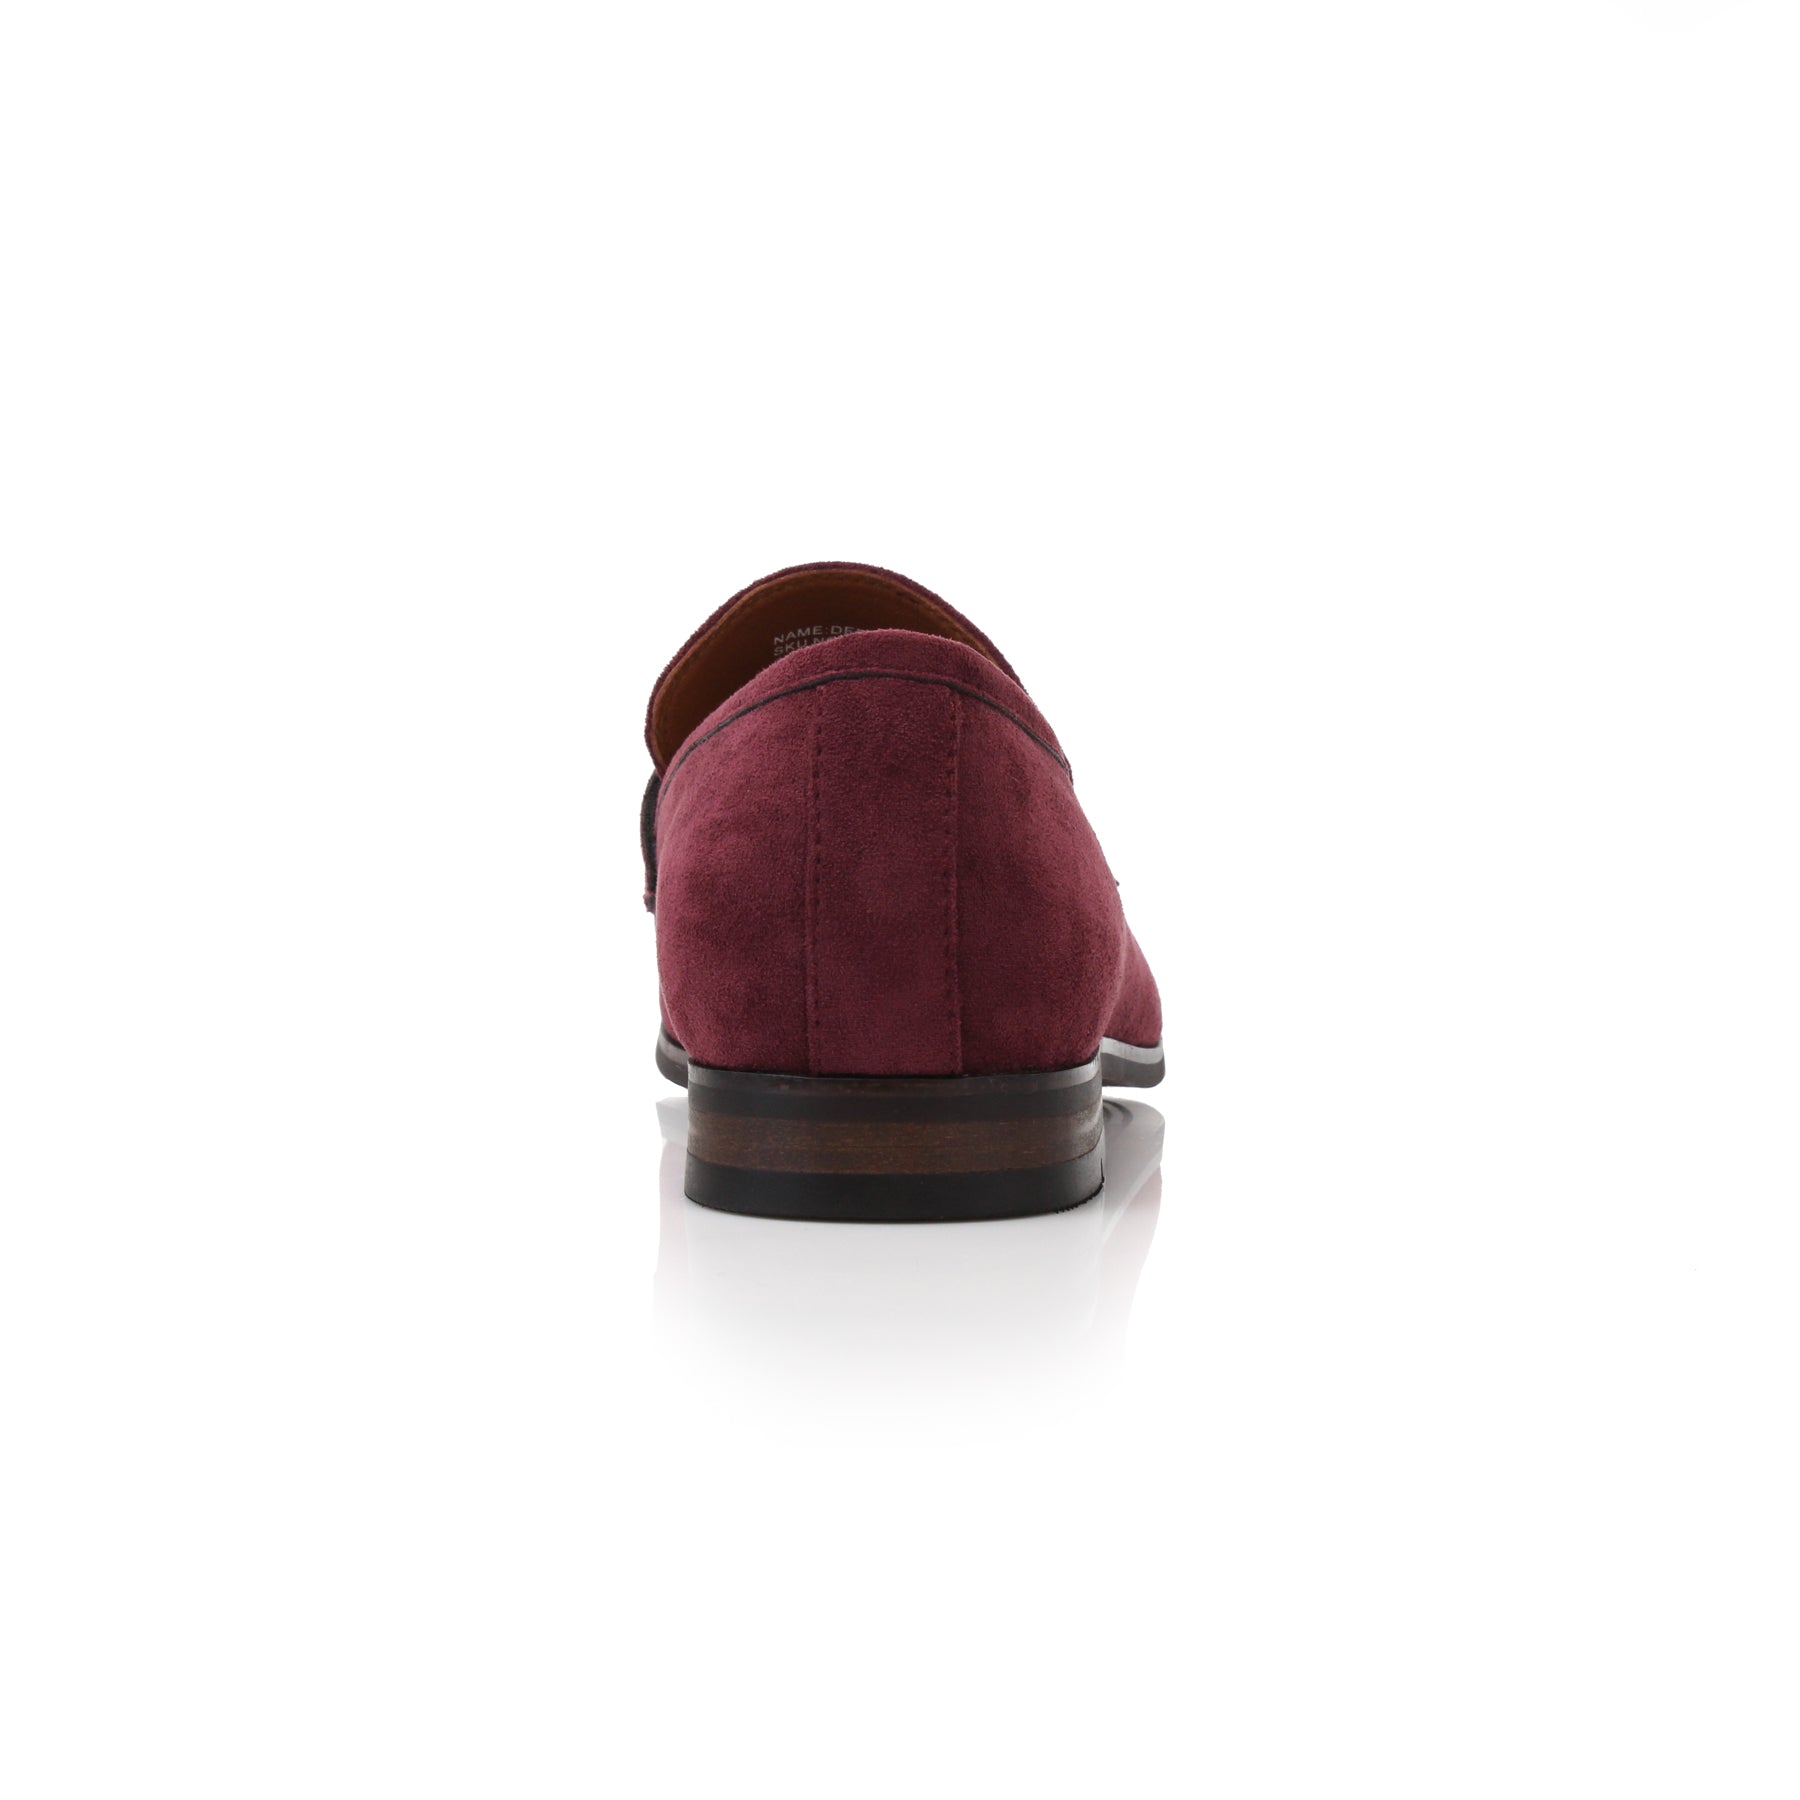 Metal Buckle Suede Loafers | Demitri by Ferro Aldo | Conal Footwear | Back Angle View